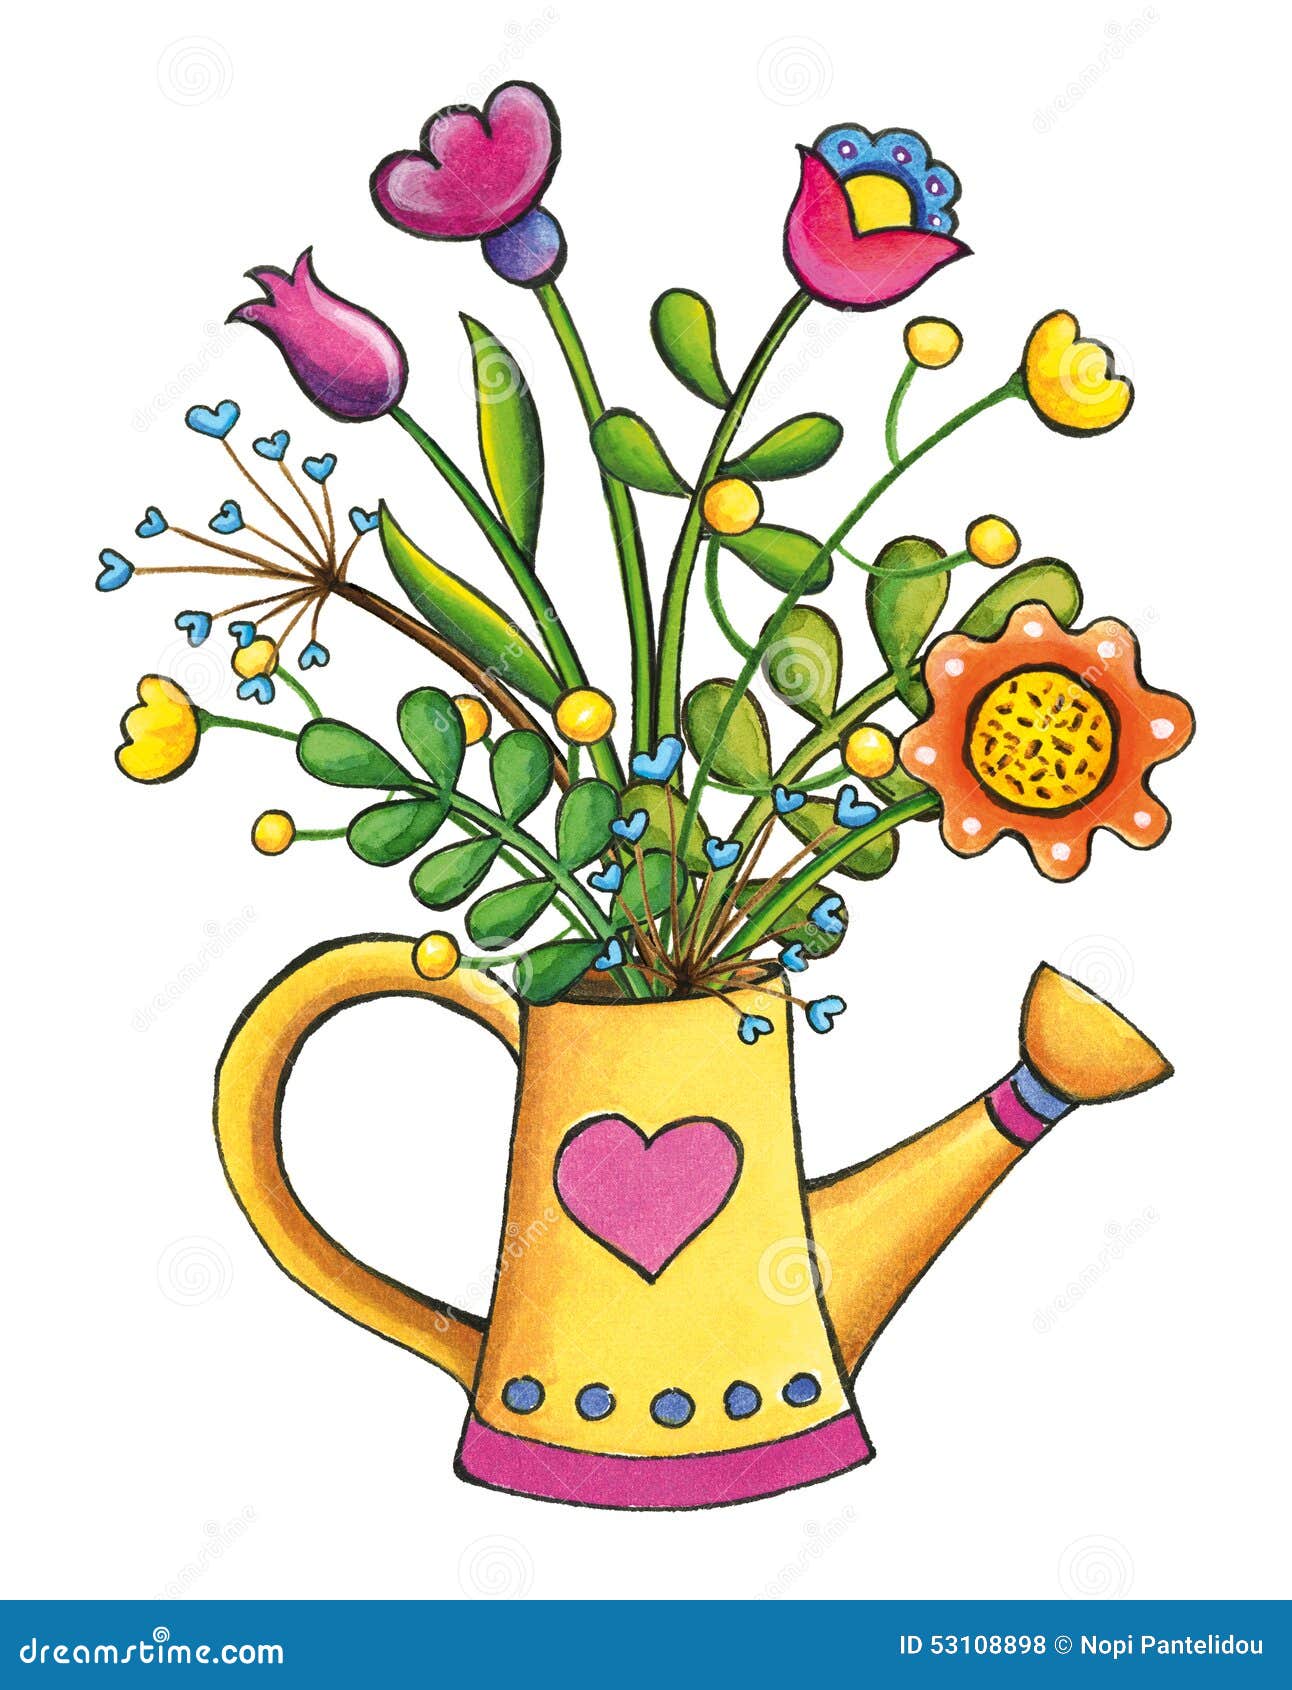 microsoft clip art mother's day - photo #27